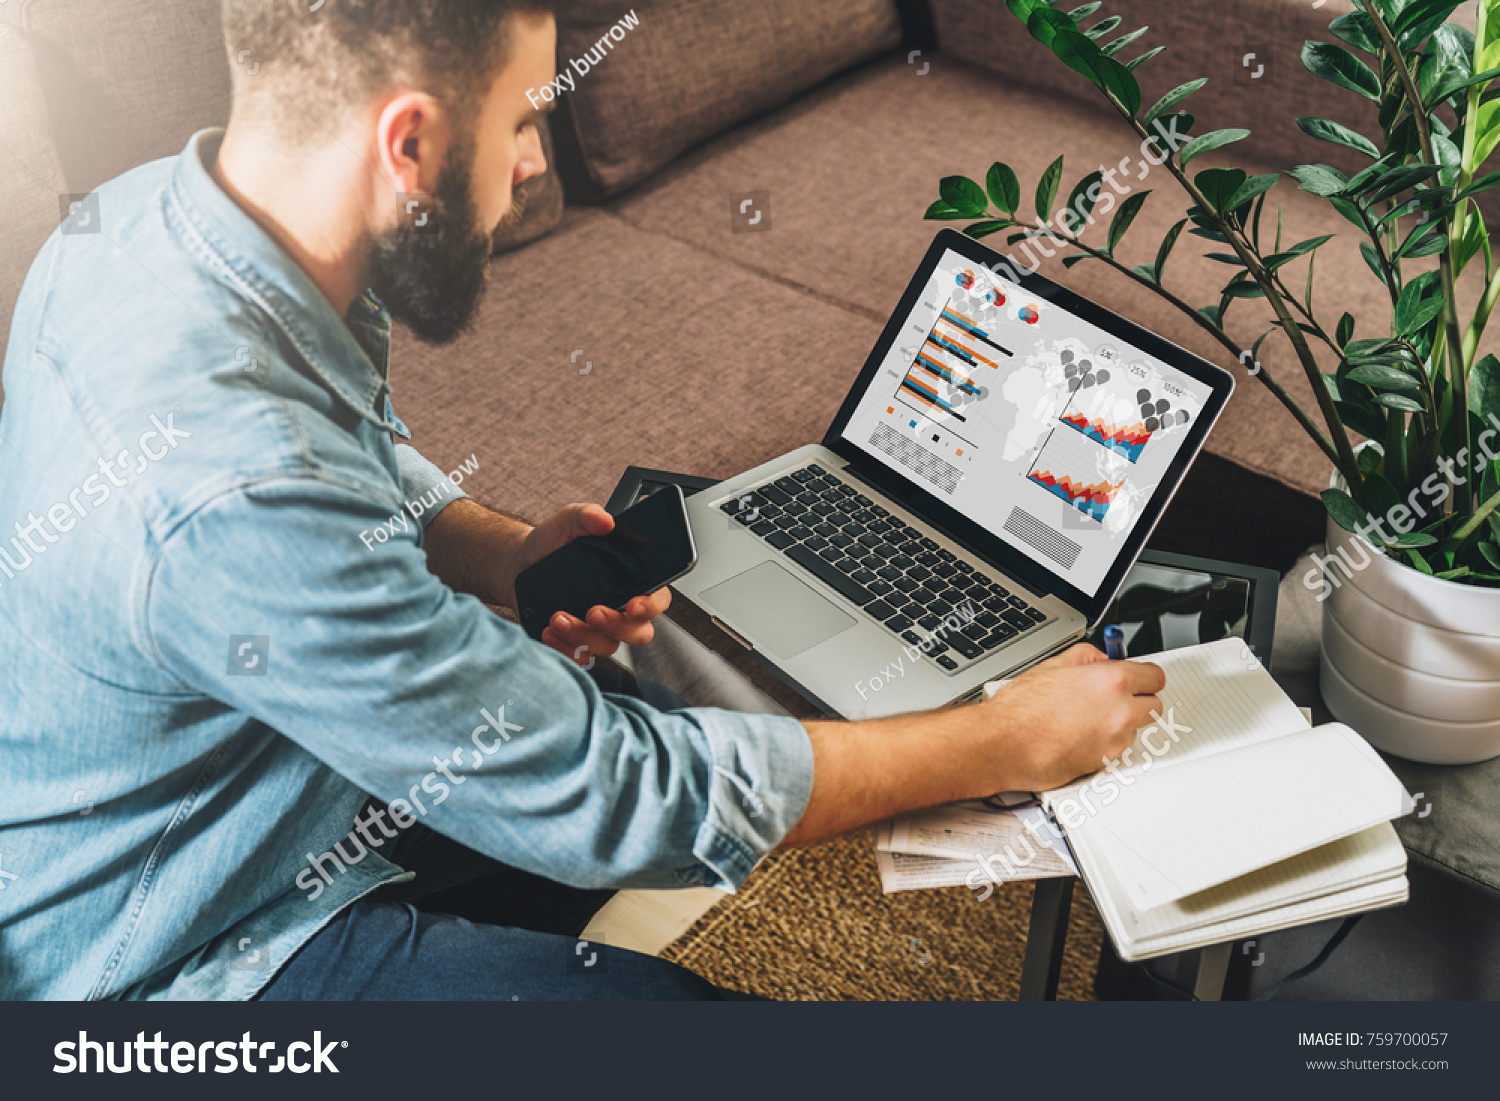 Man sits at table,working,holds smartphone,uses laptop with graphs, charts, diagrams on screen and makes notes in his notebook.Online marketing, education, e-learning, e-commerce. Startup, planning. #759700057